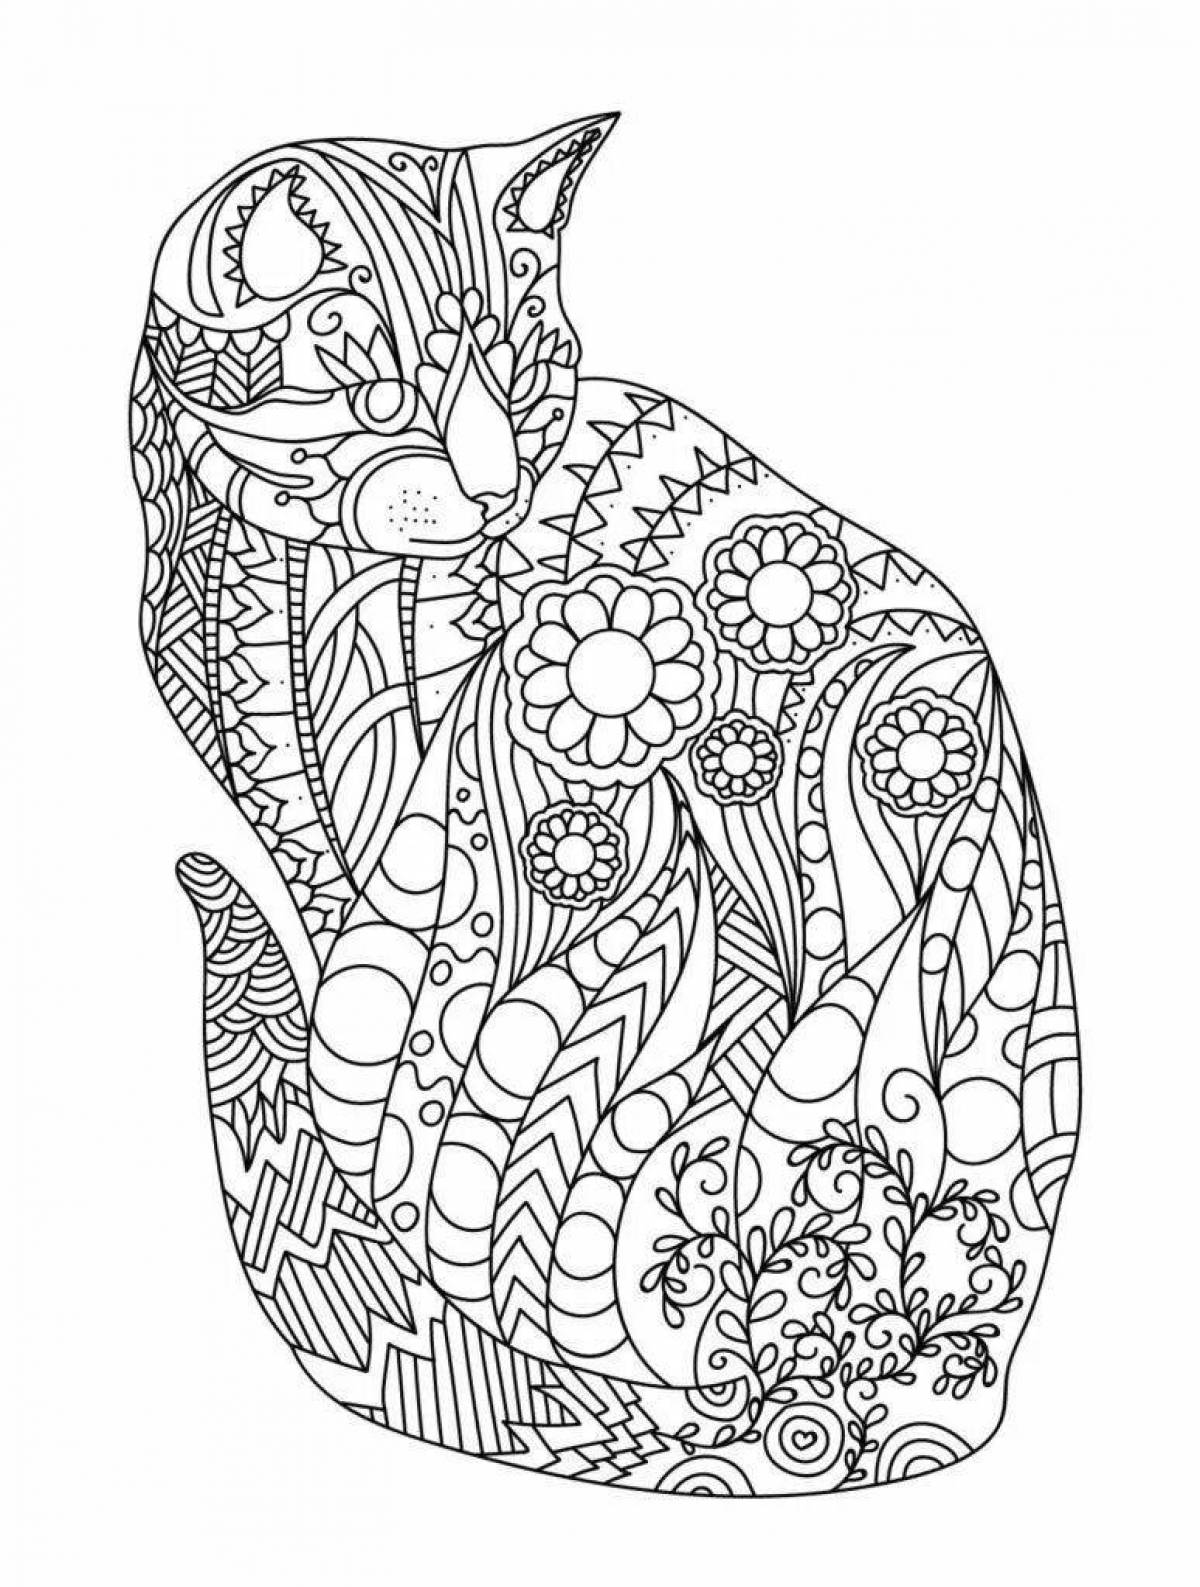 Charming coloring book relaxation antistress for adults